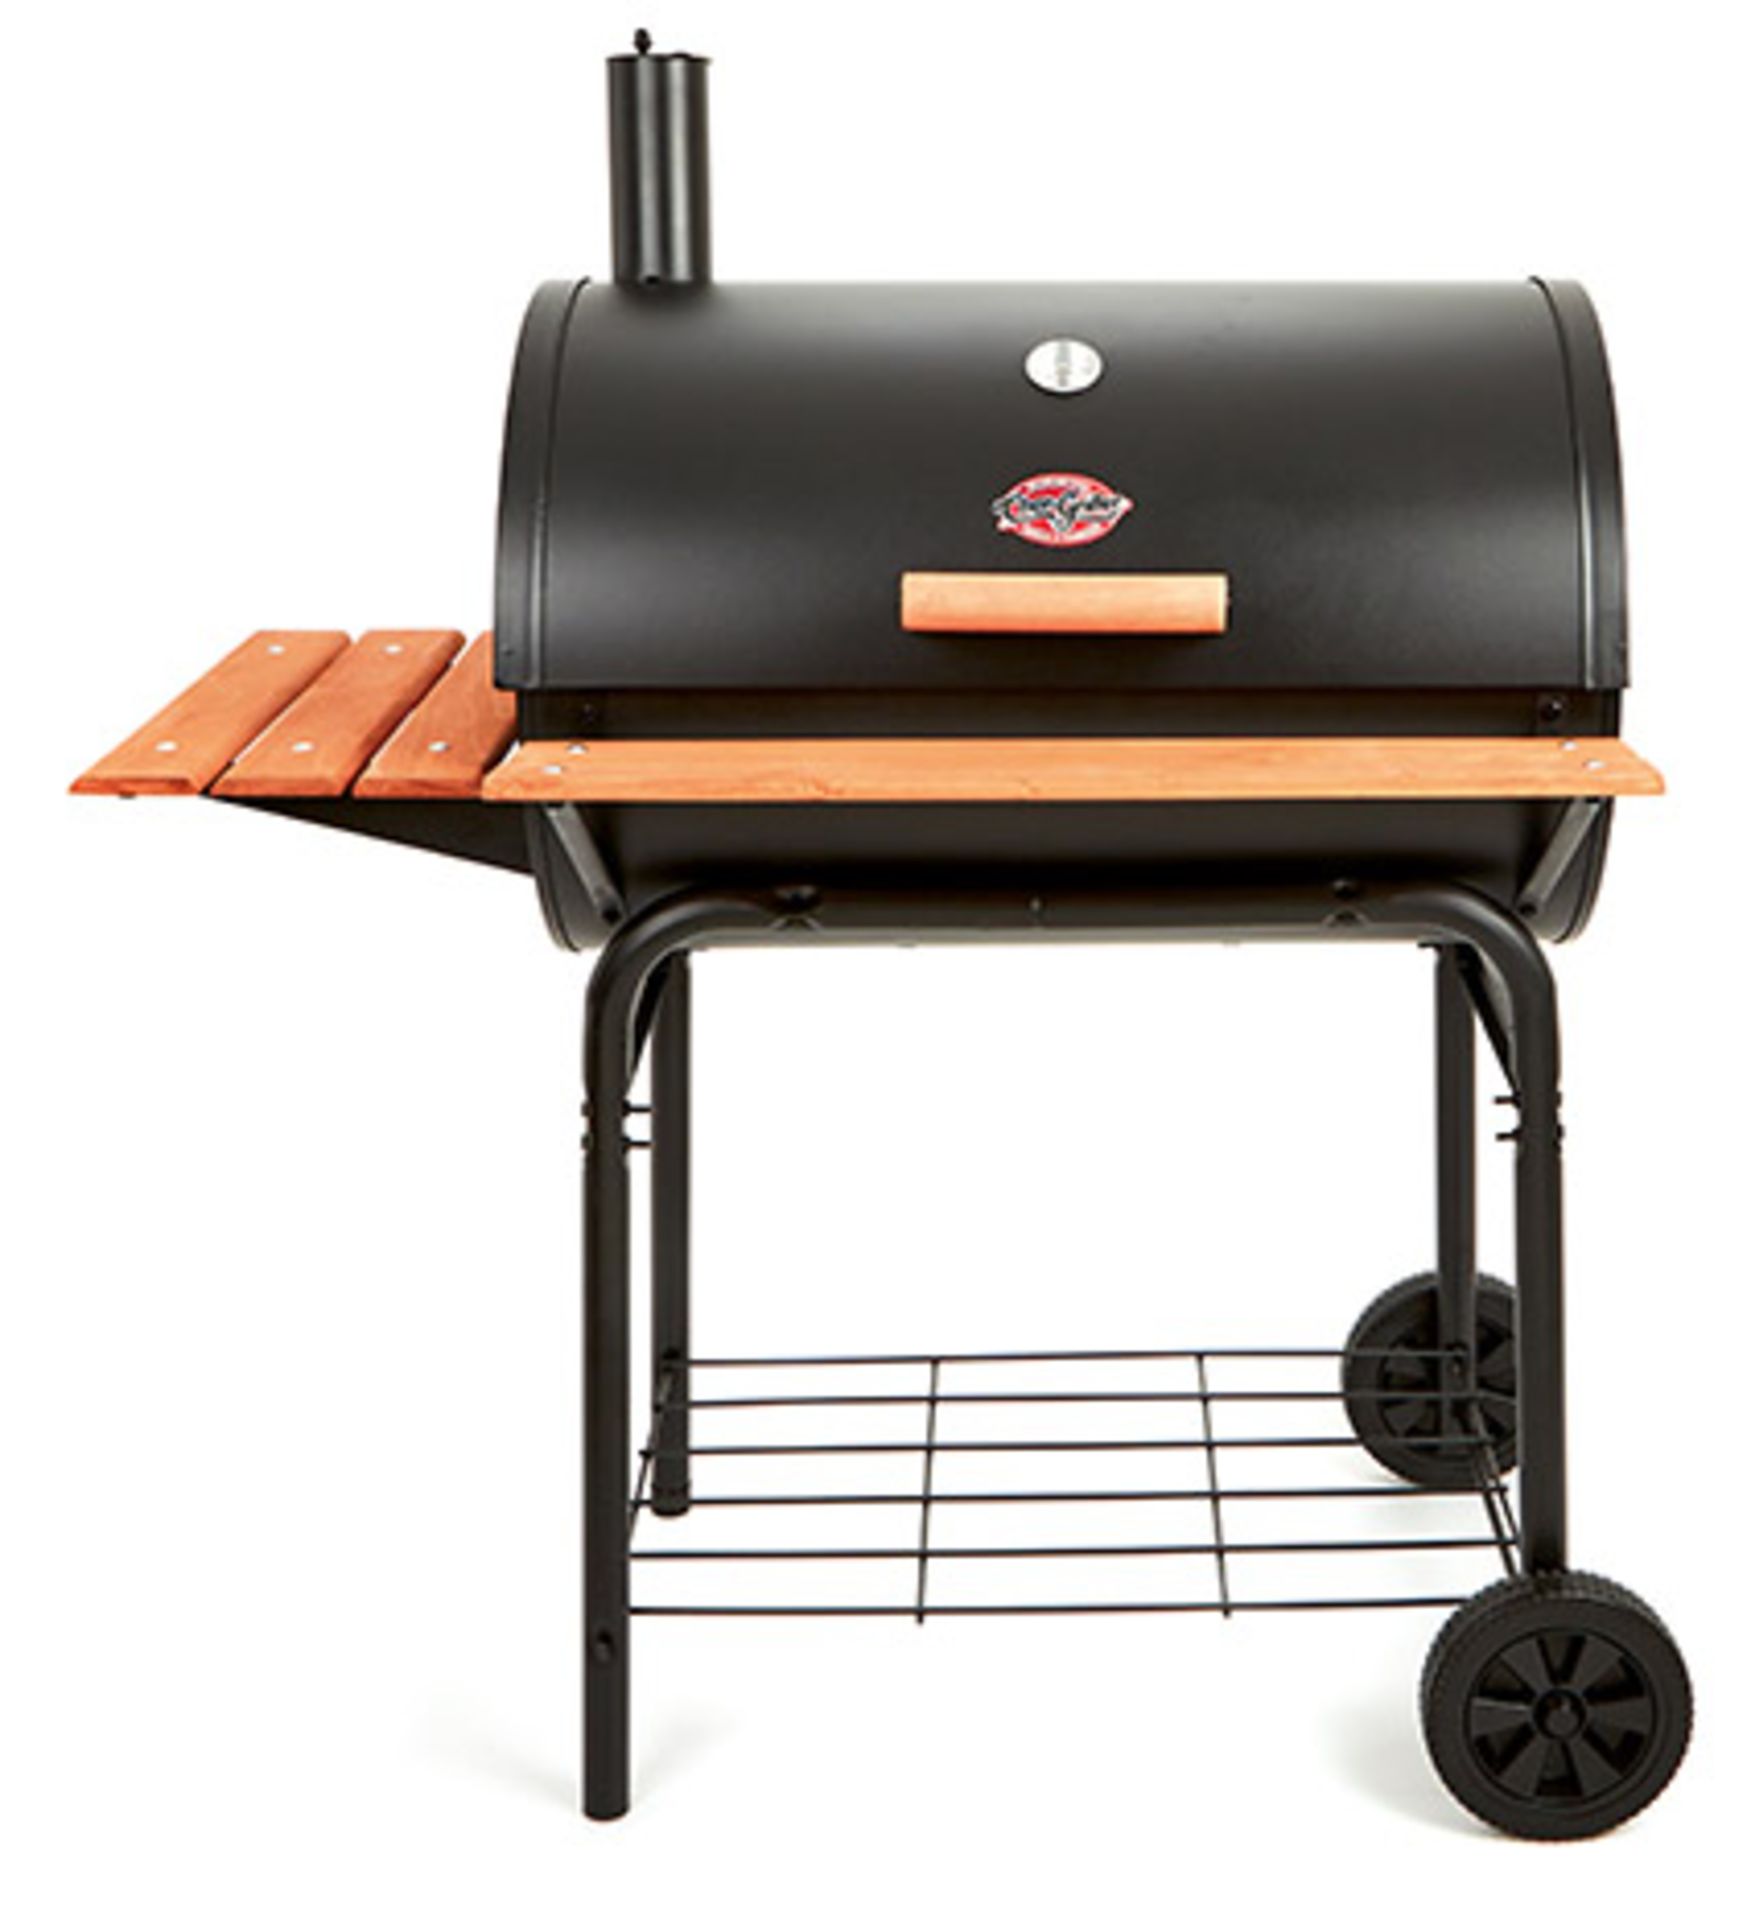 BRAND NEW* CHARCOAL GRILL PRO BLACK PATIO OUTDOOR GARDEN XL COOKING DELUXE AIR NEW CHAR BBQ - Image 8 of 8